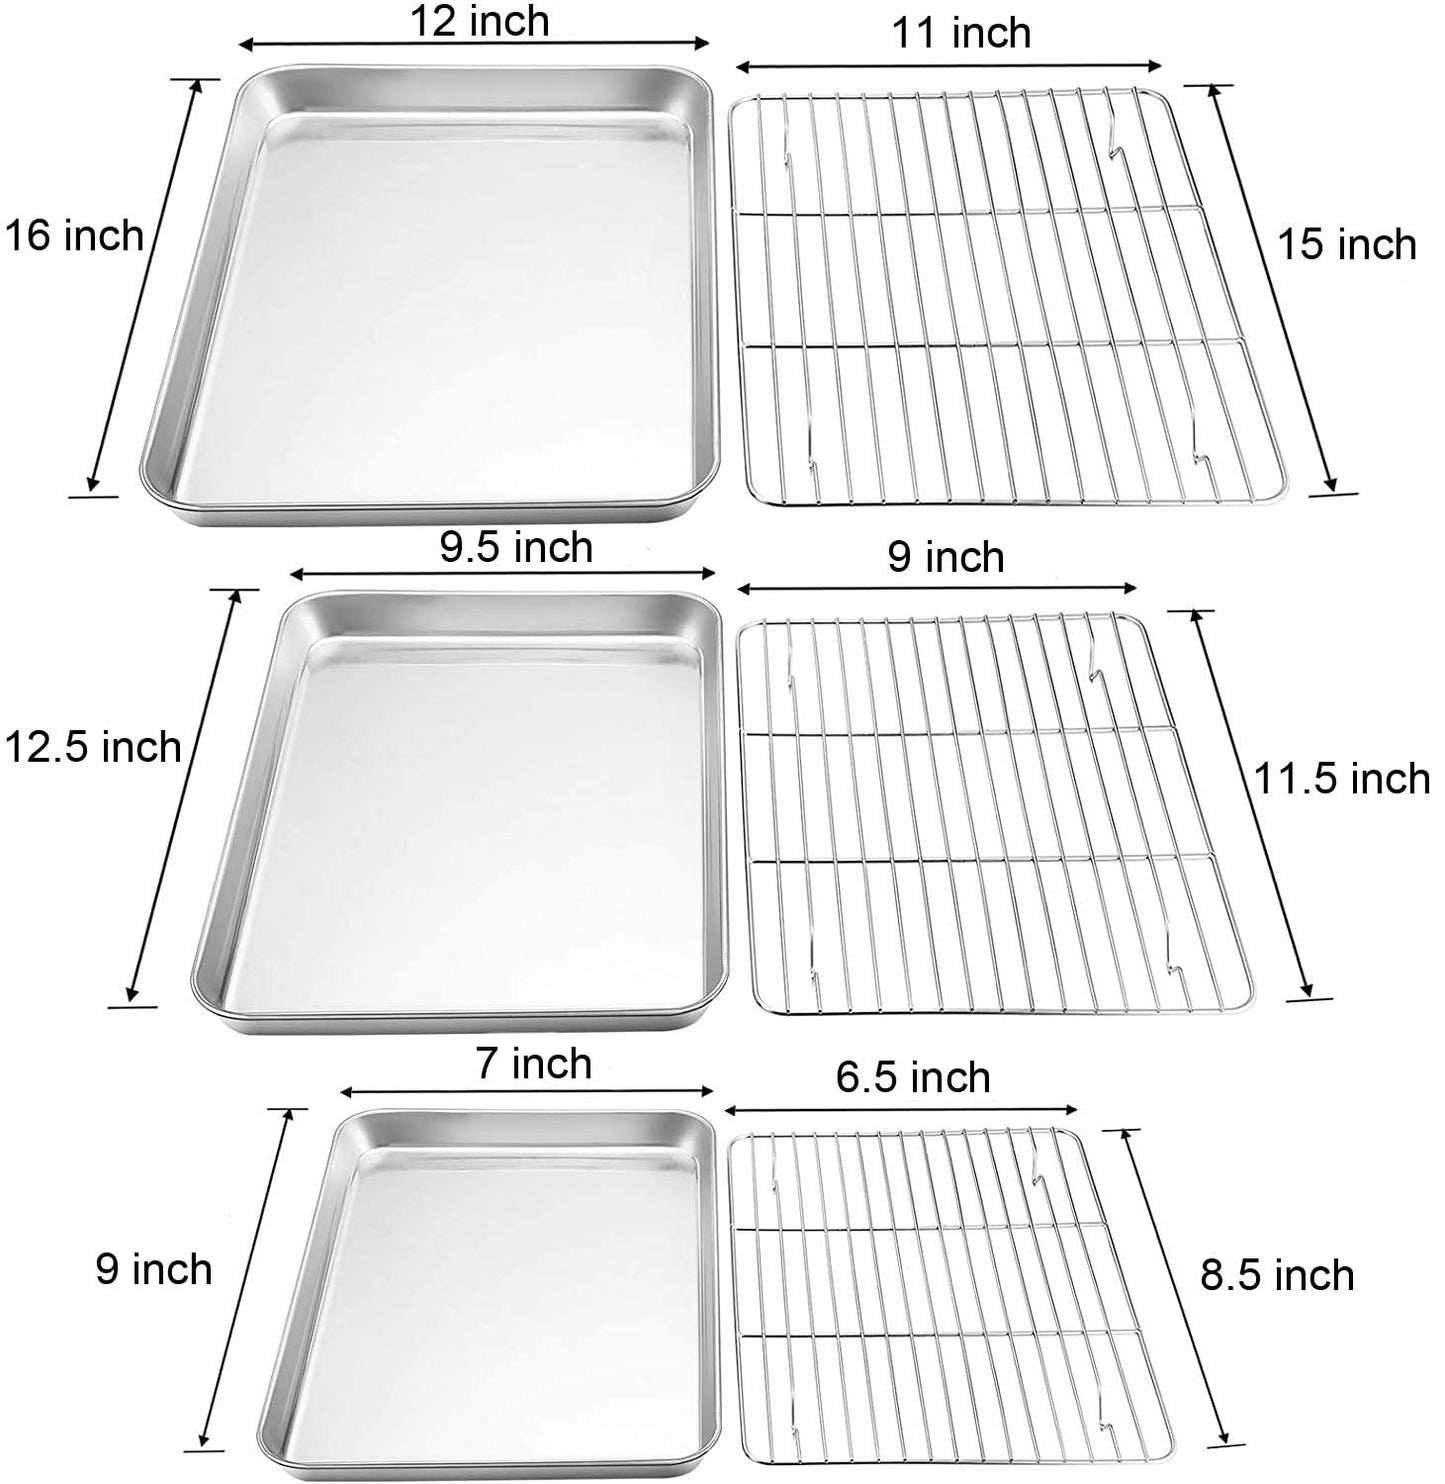 TeamFar Baking Sheet with Rack Set, Stainless Steel Cookie Sheet Baking Pans with Cooling Rack, Non Toxic & Healthy, Rust Free & Heavy Duty, Mirror Finish & Easy Clean, Dishwasher Safe - 6 Pieces - CookCave